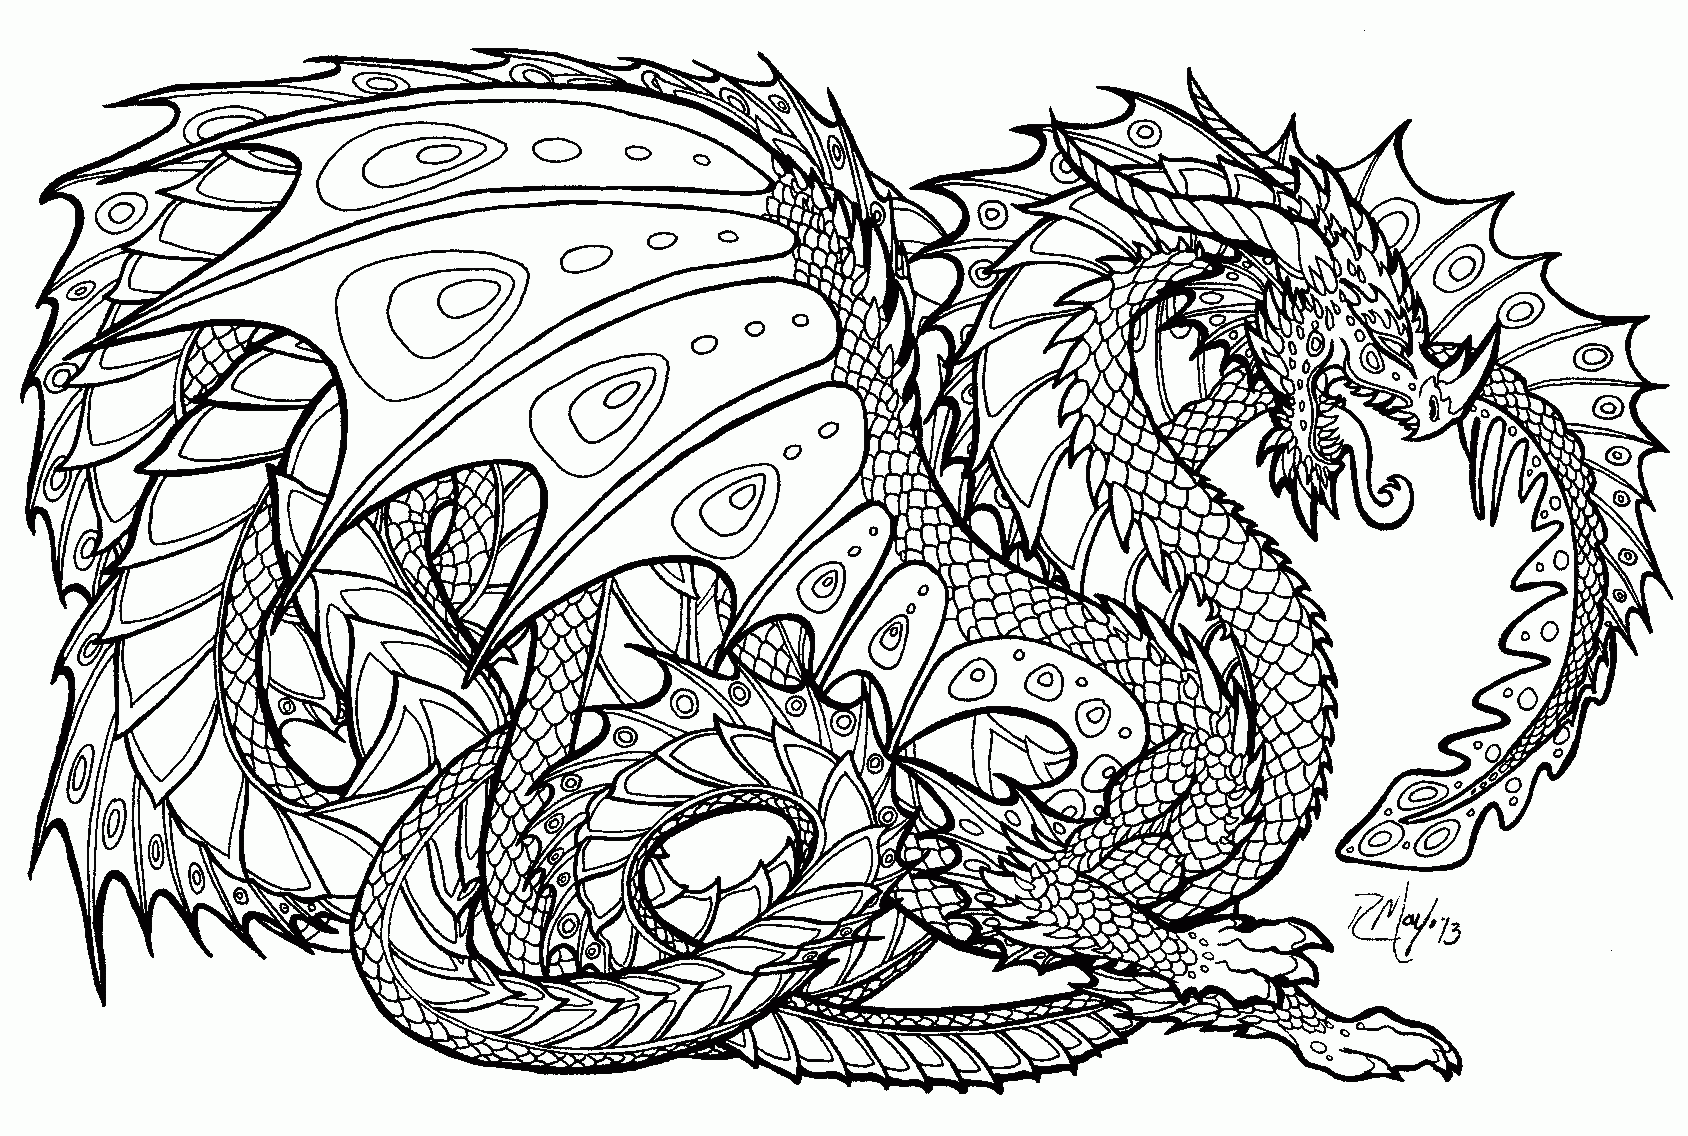 Free Detailed Coloring Pages | yeskebumennewsco